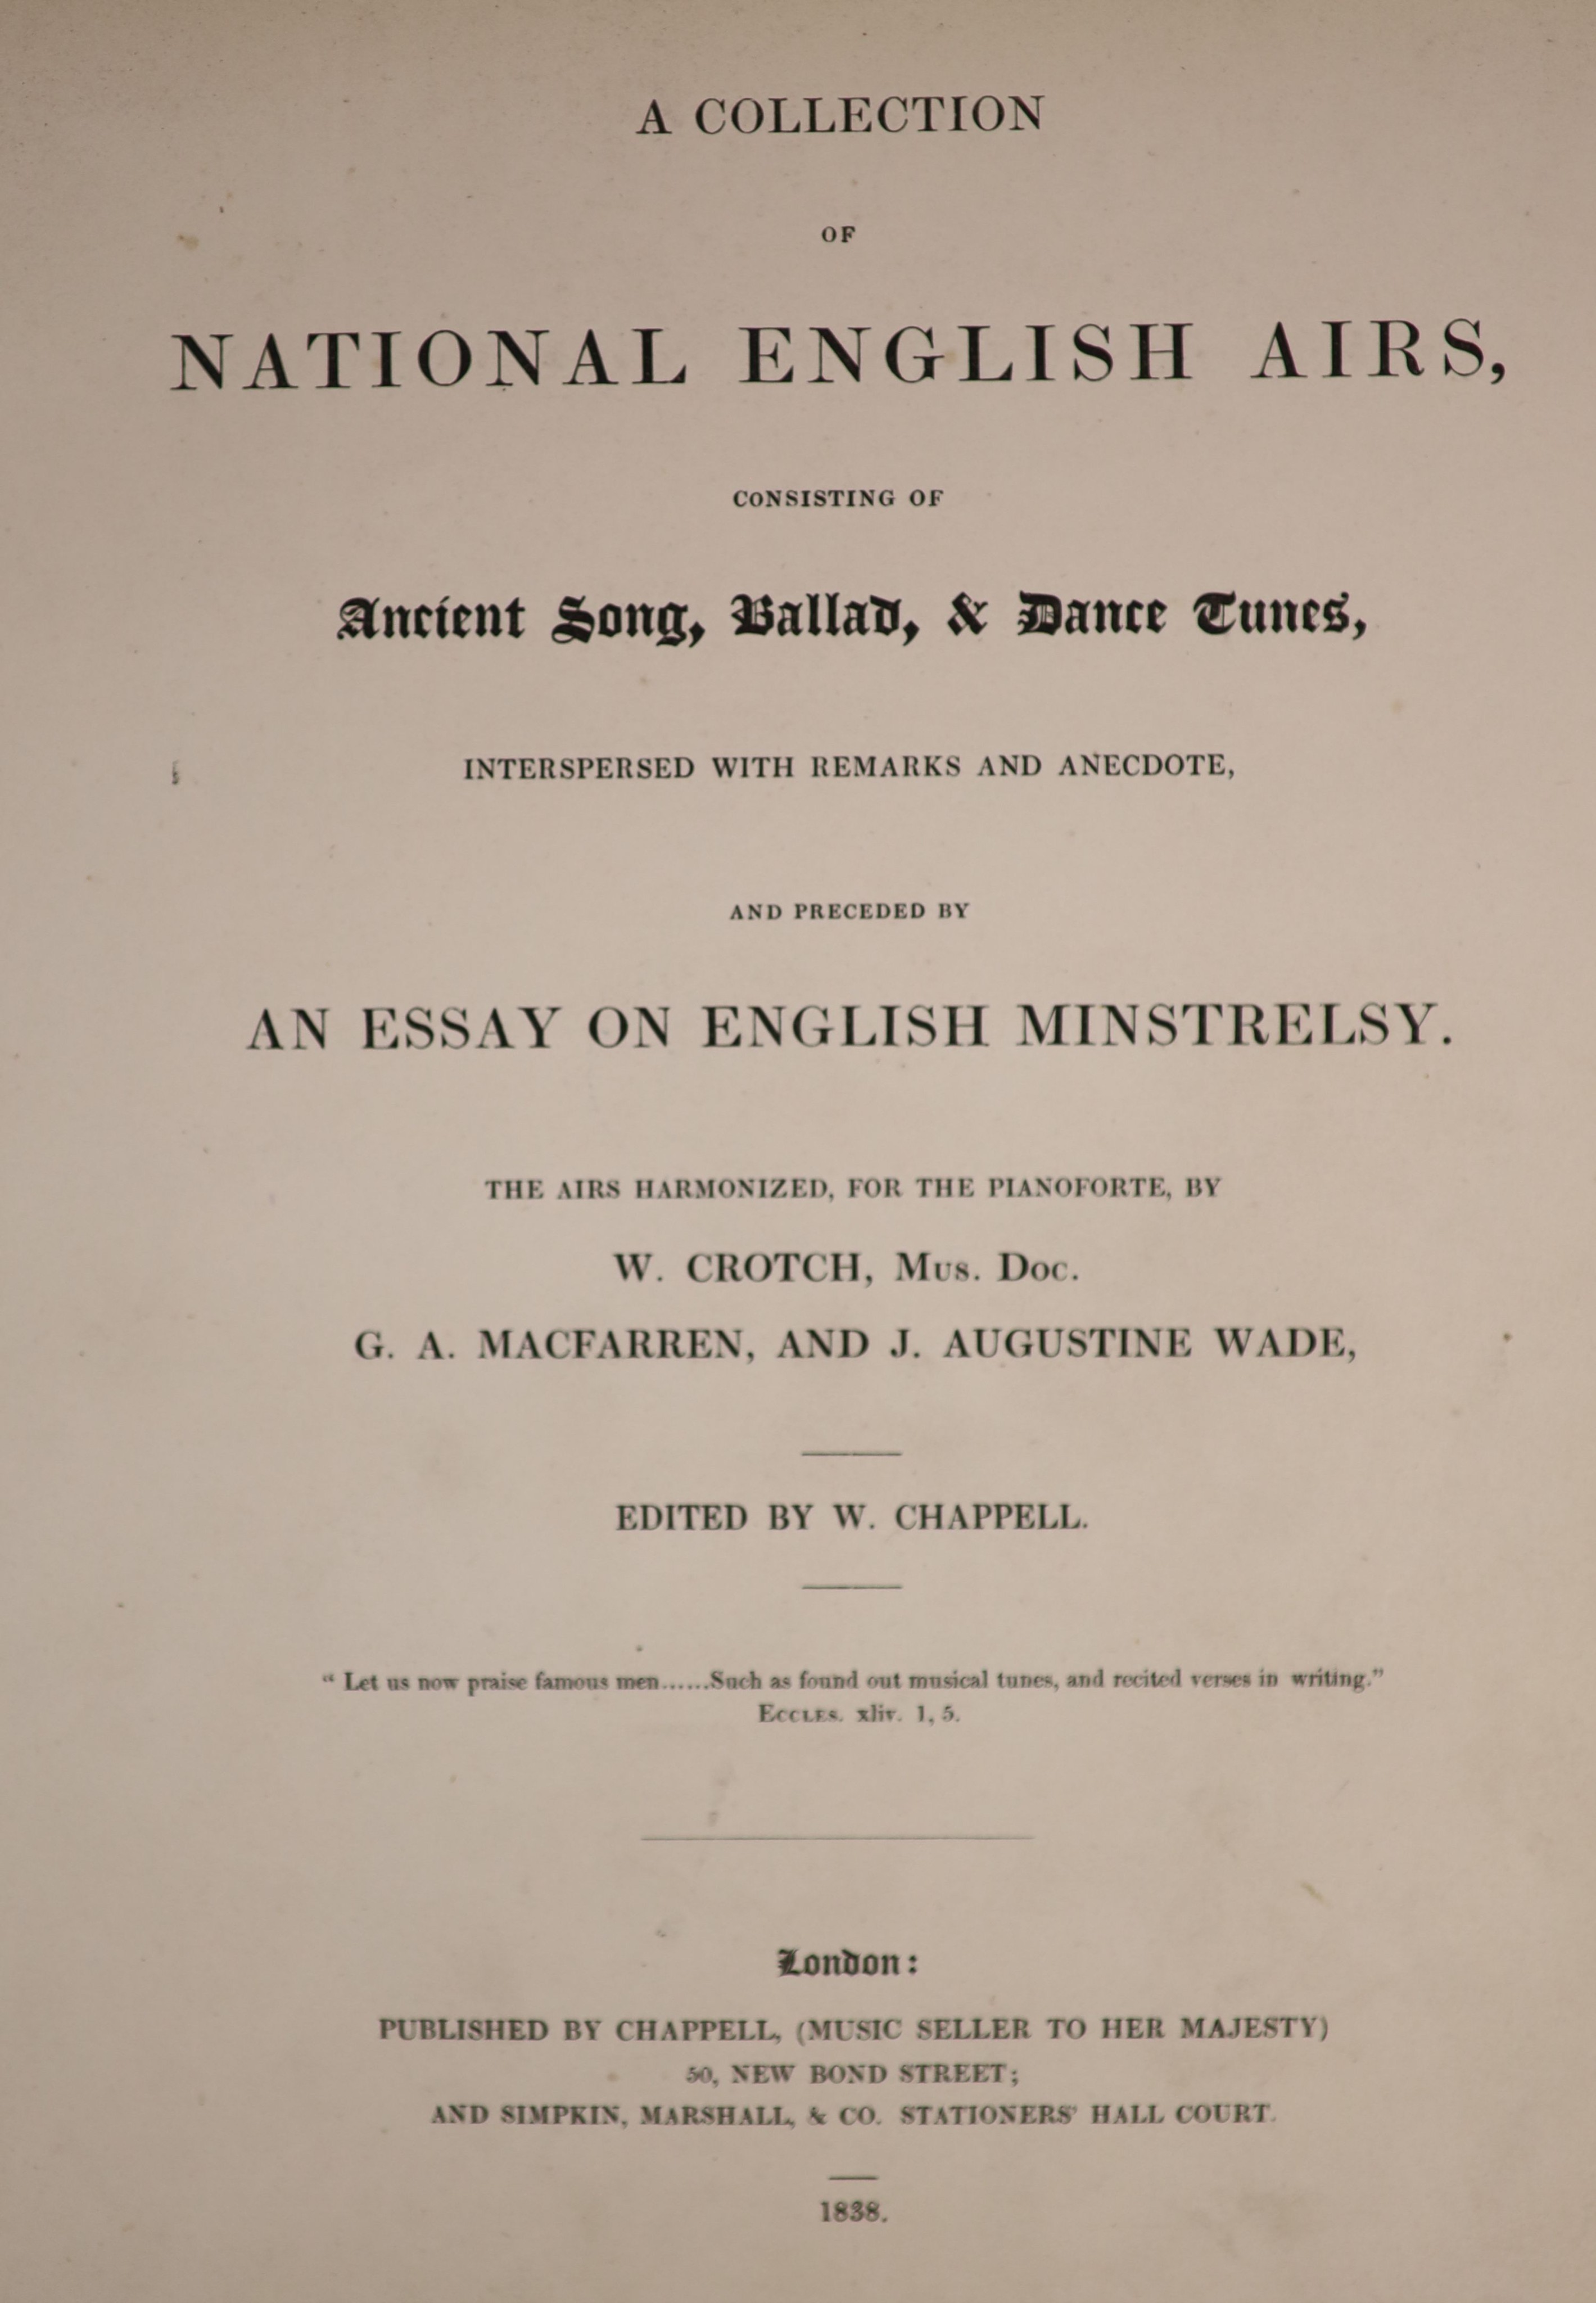 Chappell, W. (editor) - A Collection of National English Airs, consisting of Ancient song, Ballard, & Dance tunes…Complete with illustrated and printed title pages and numerous musical illustrations within the text. Half